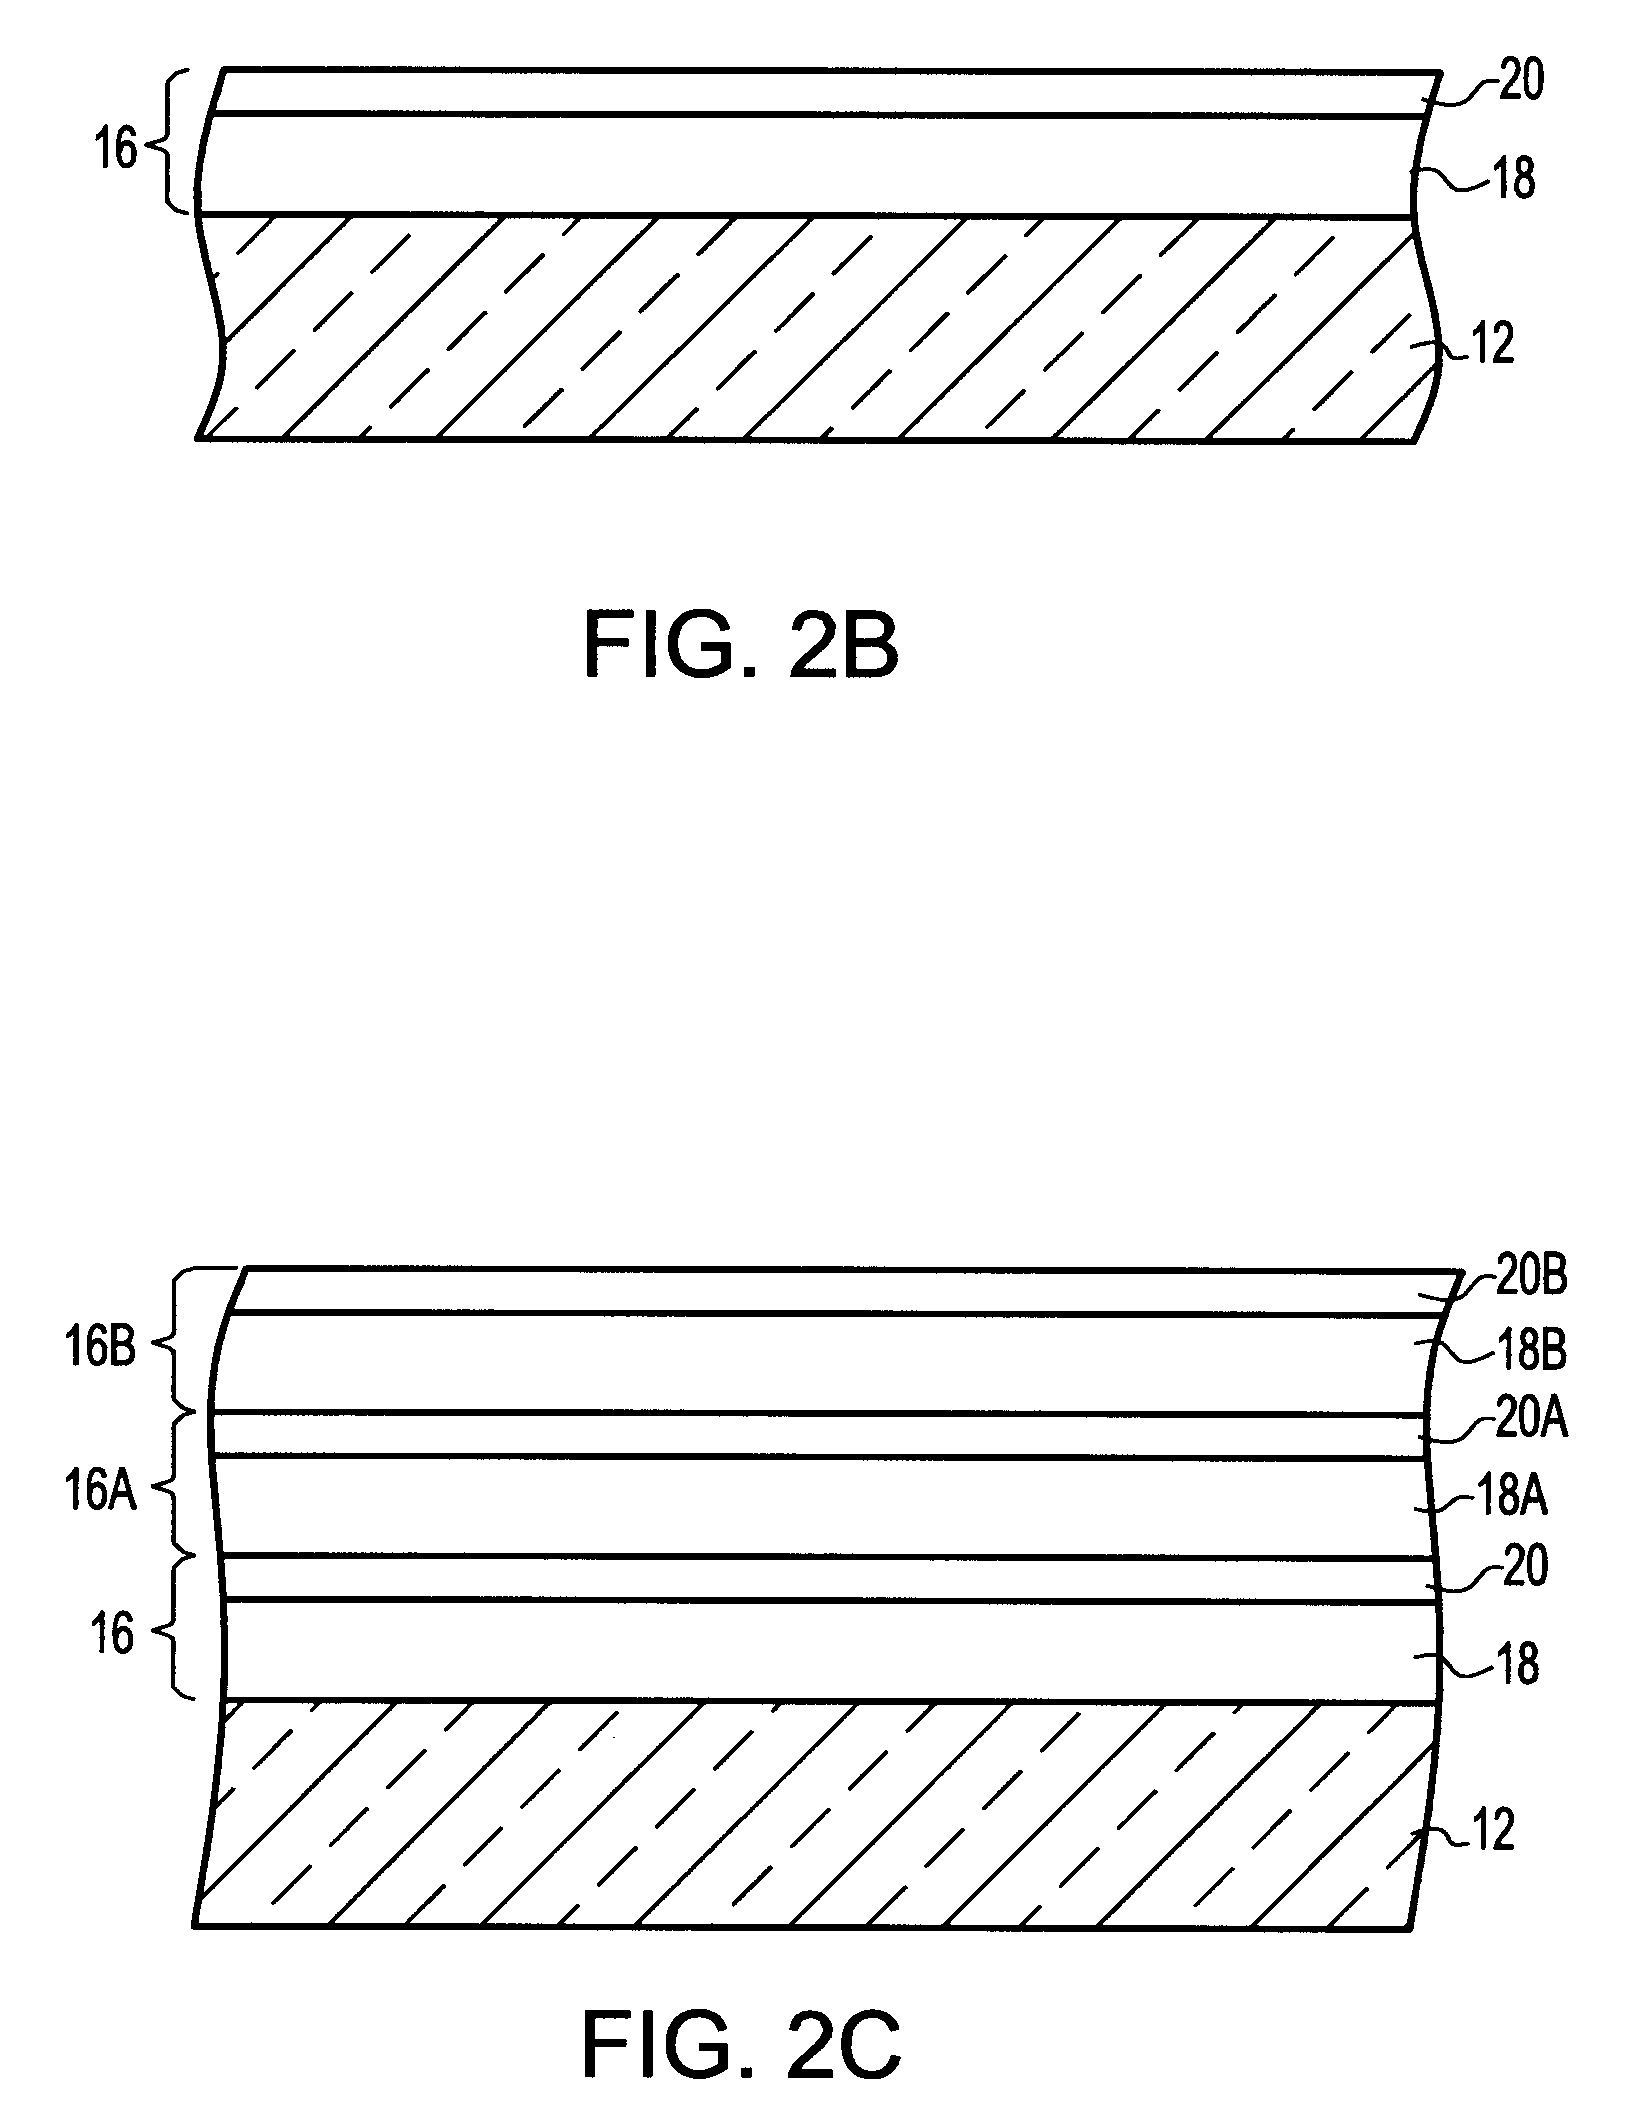 Method of producing highly strained PECVD silicon nitride thin films at low temperature